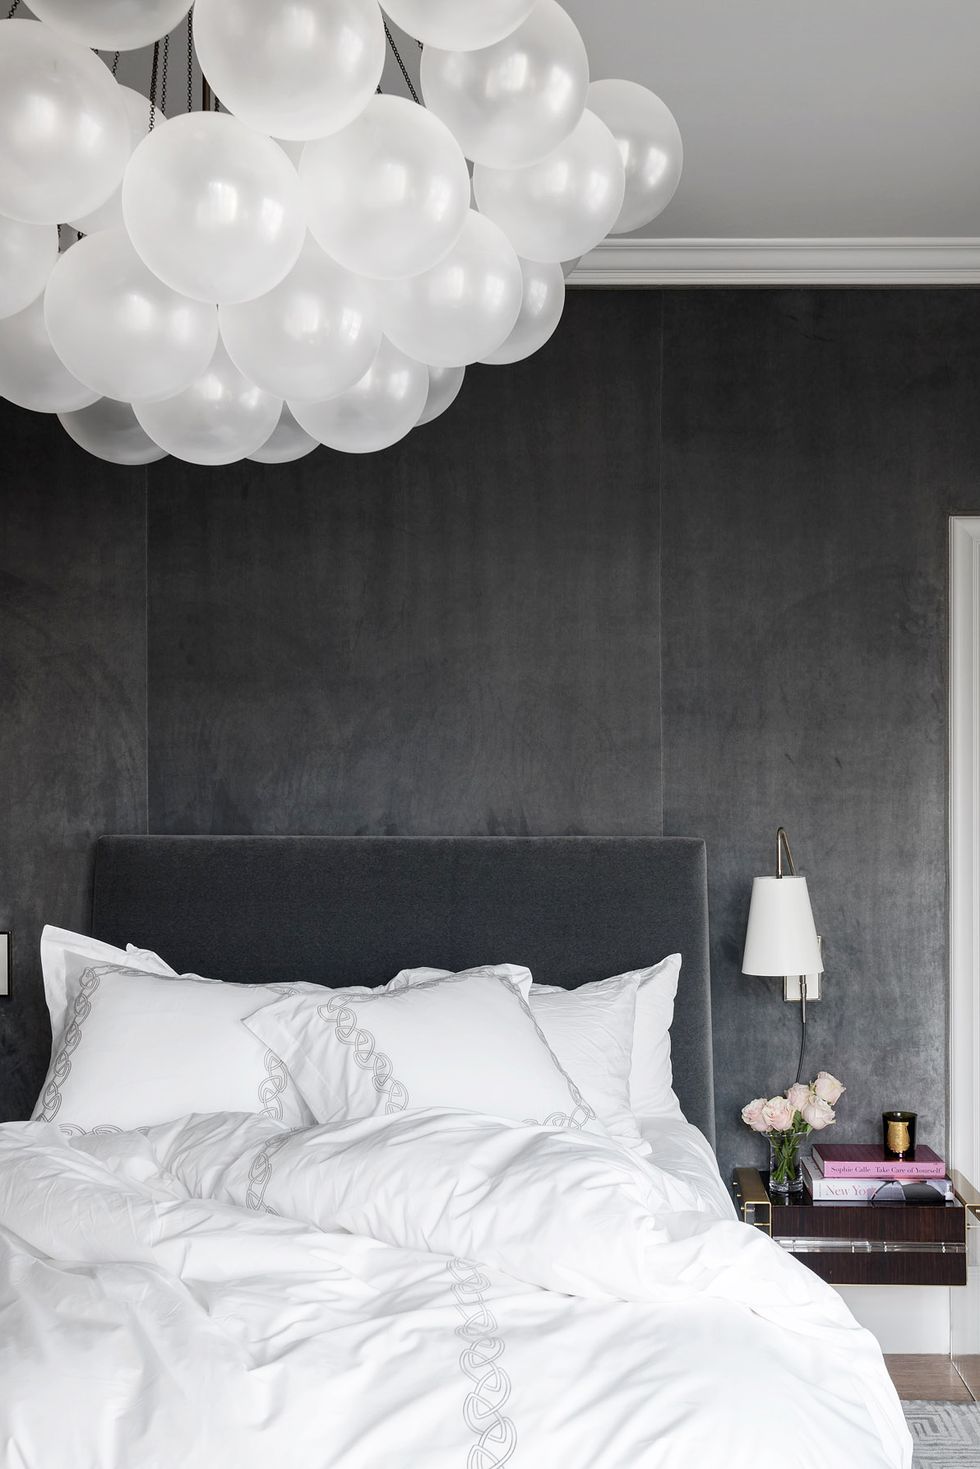 Designers on How to Bring Romance to the Bedroom, According to